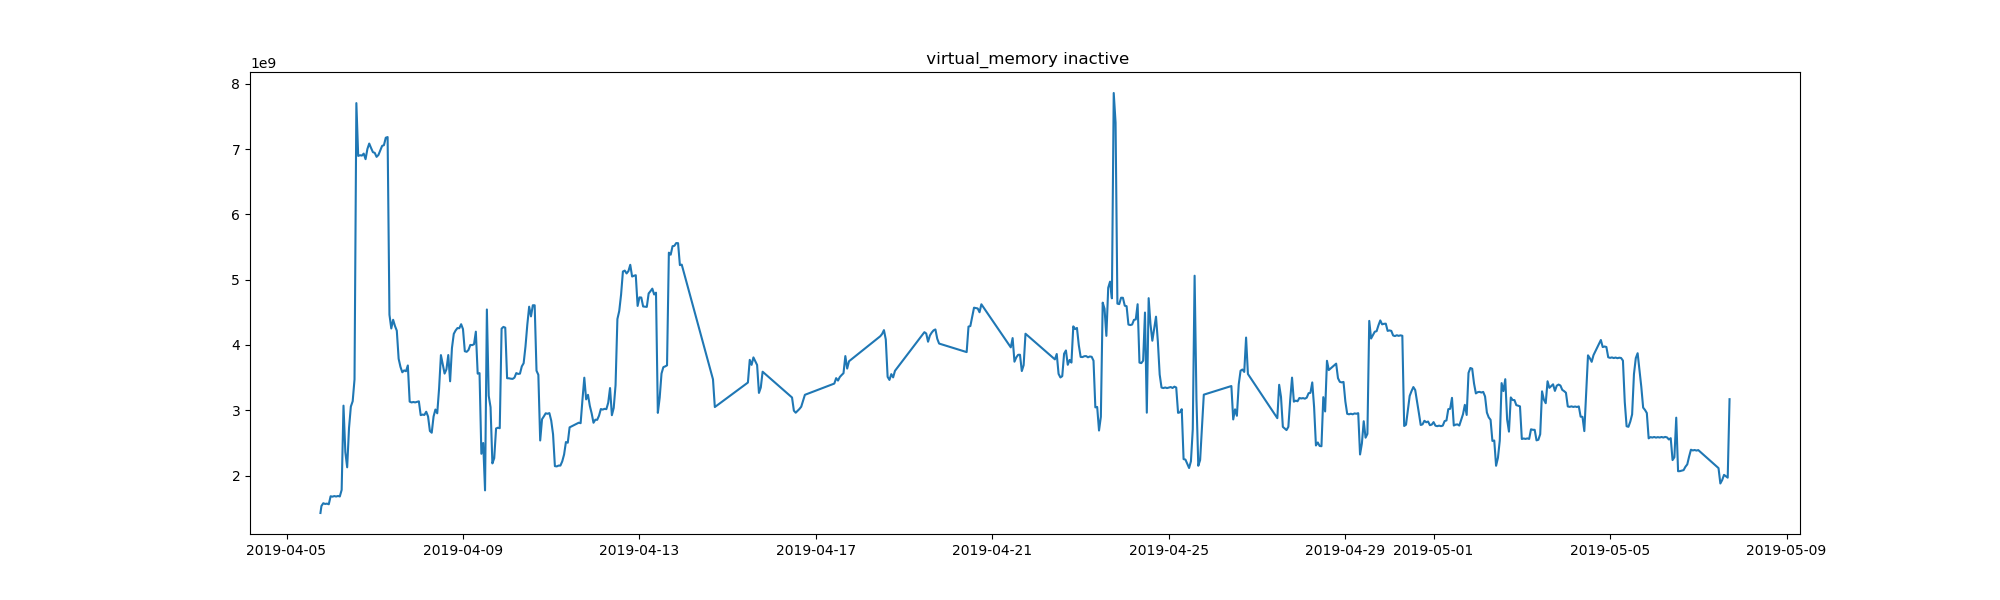 task-memory-virtual_memory-total-available-percent-used-free-active-inactive.png